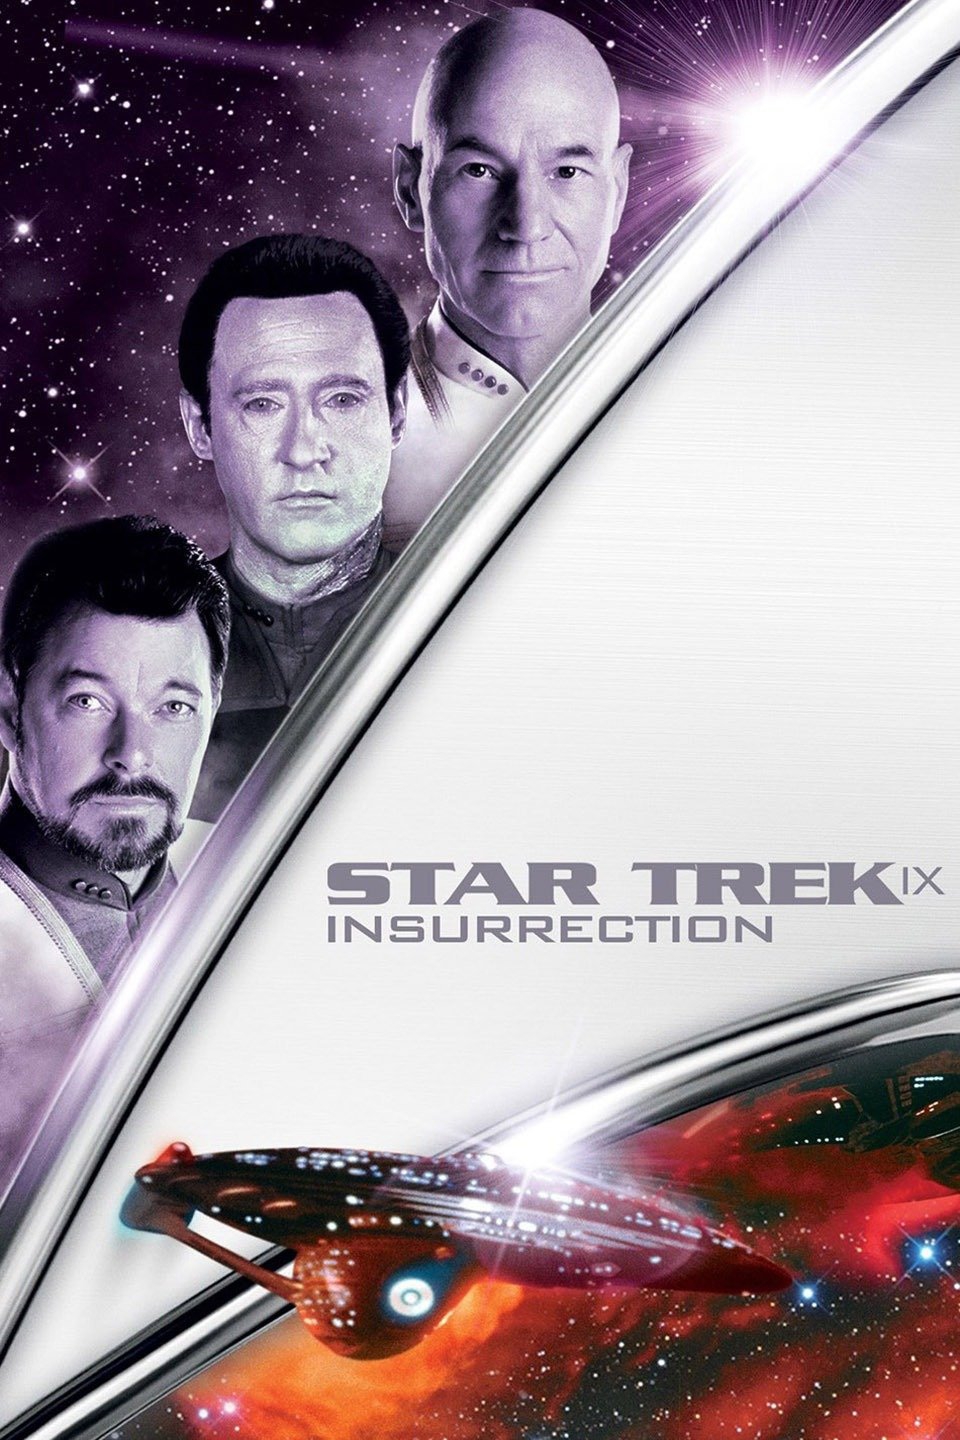 Details about   Star Trek Insurrection Exclusive Movie Pin 12-11-98 